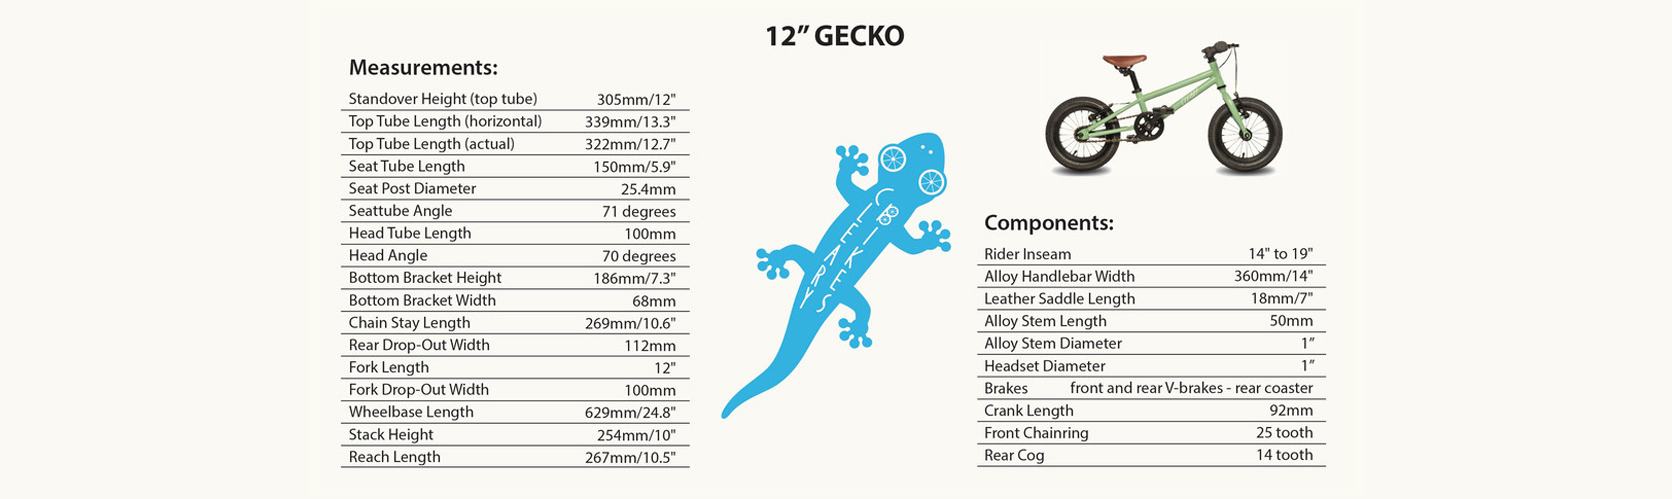 Cleary Gecko 12"